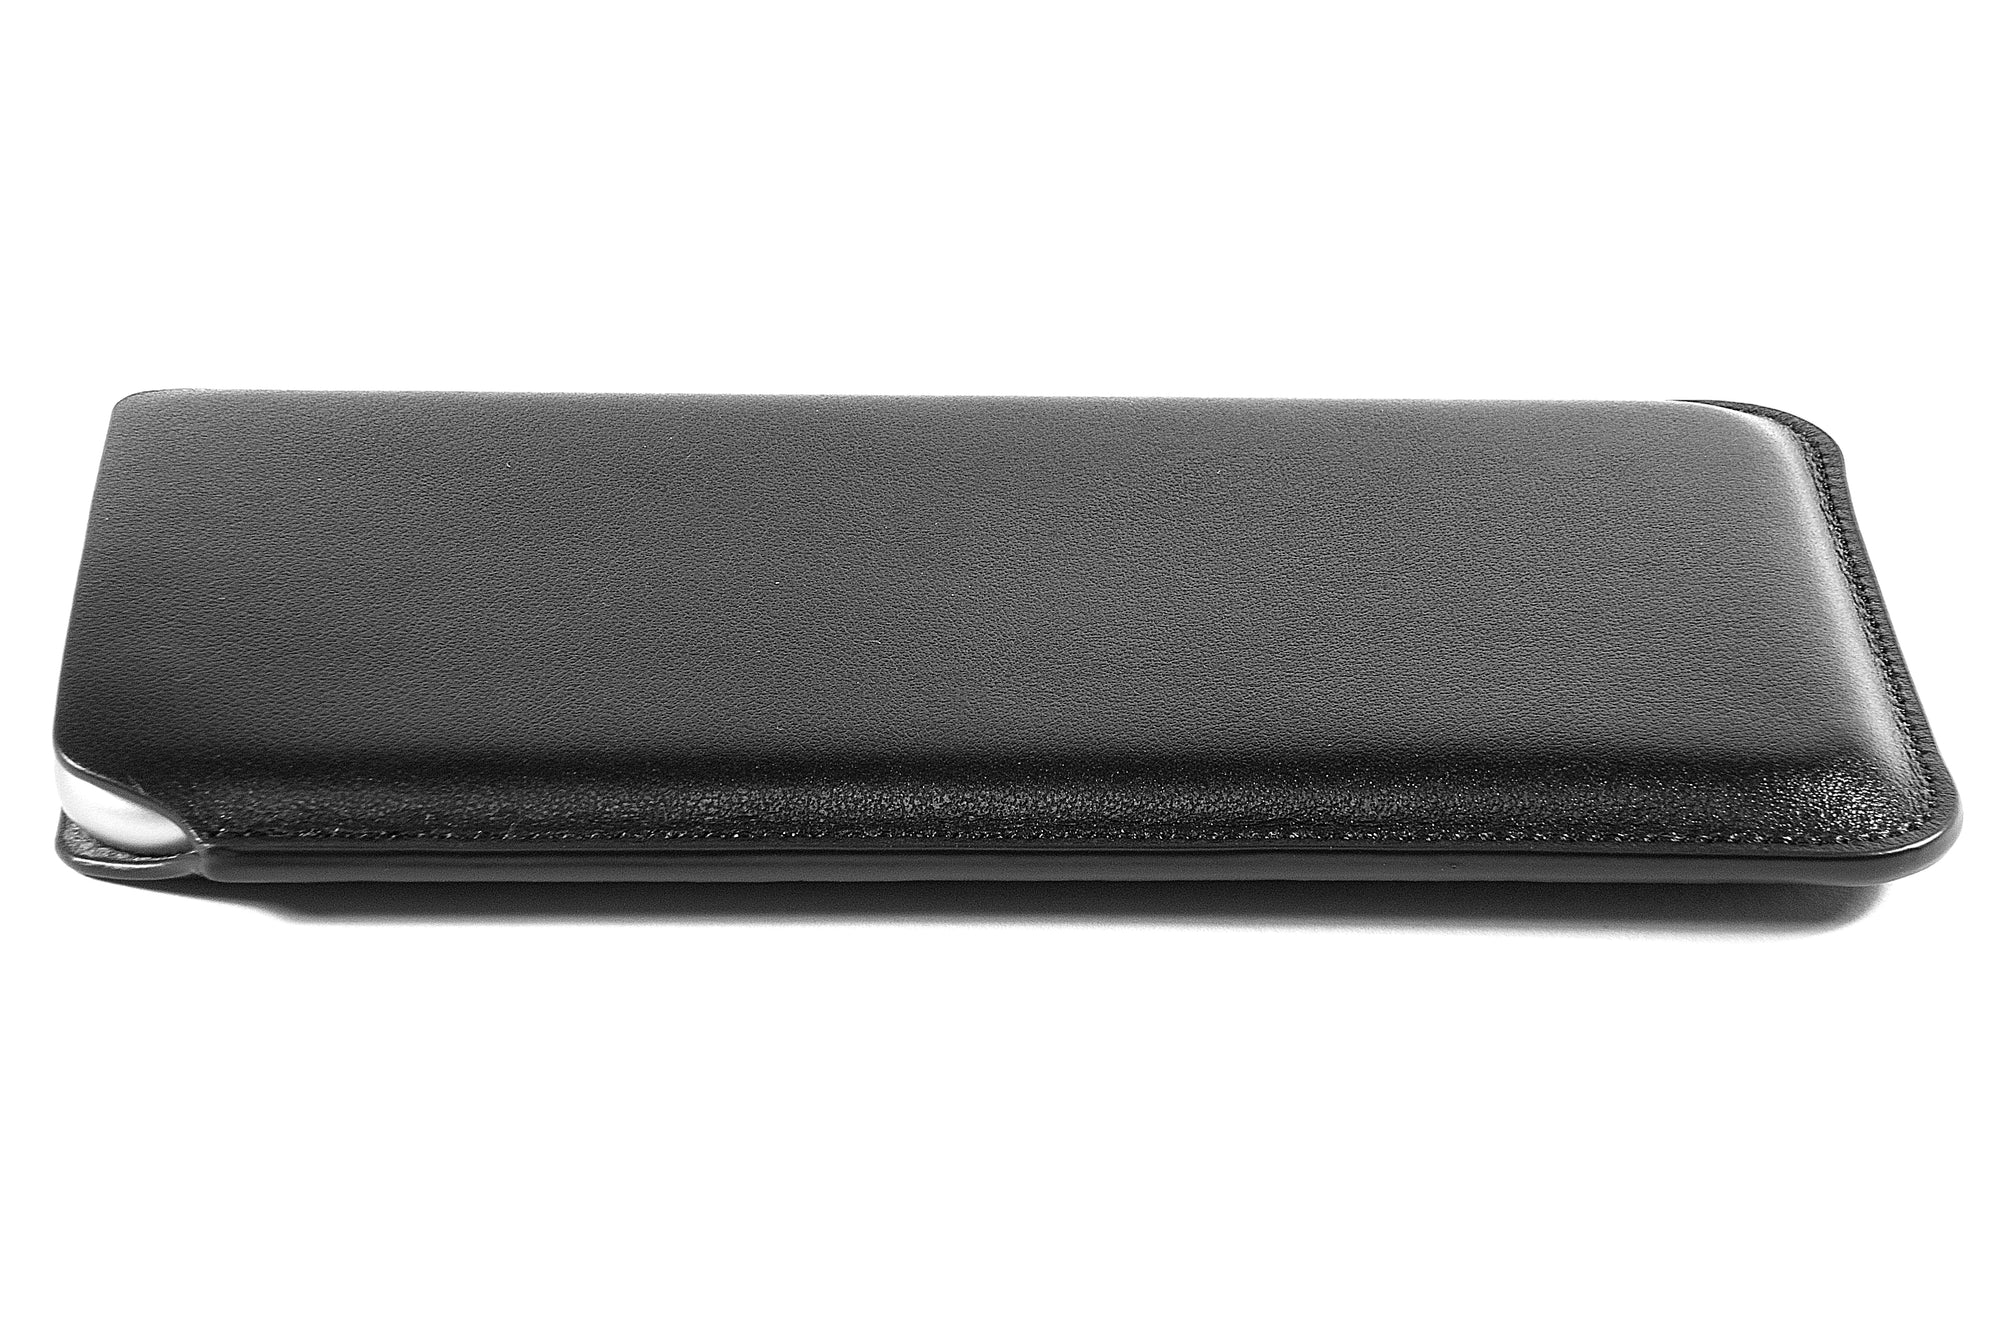 iPhone 11 Leather Case Pouch - Skinny Fit - Black